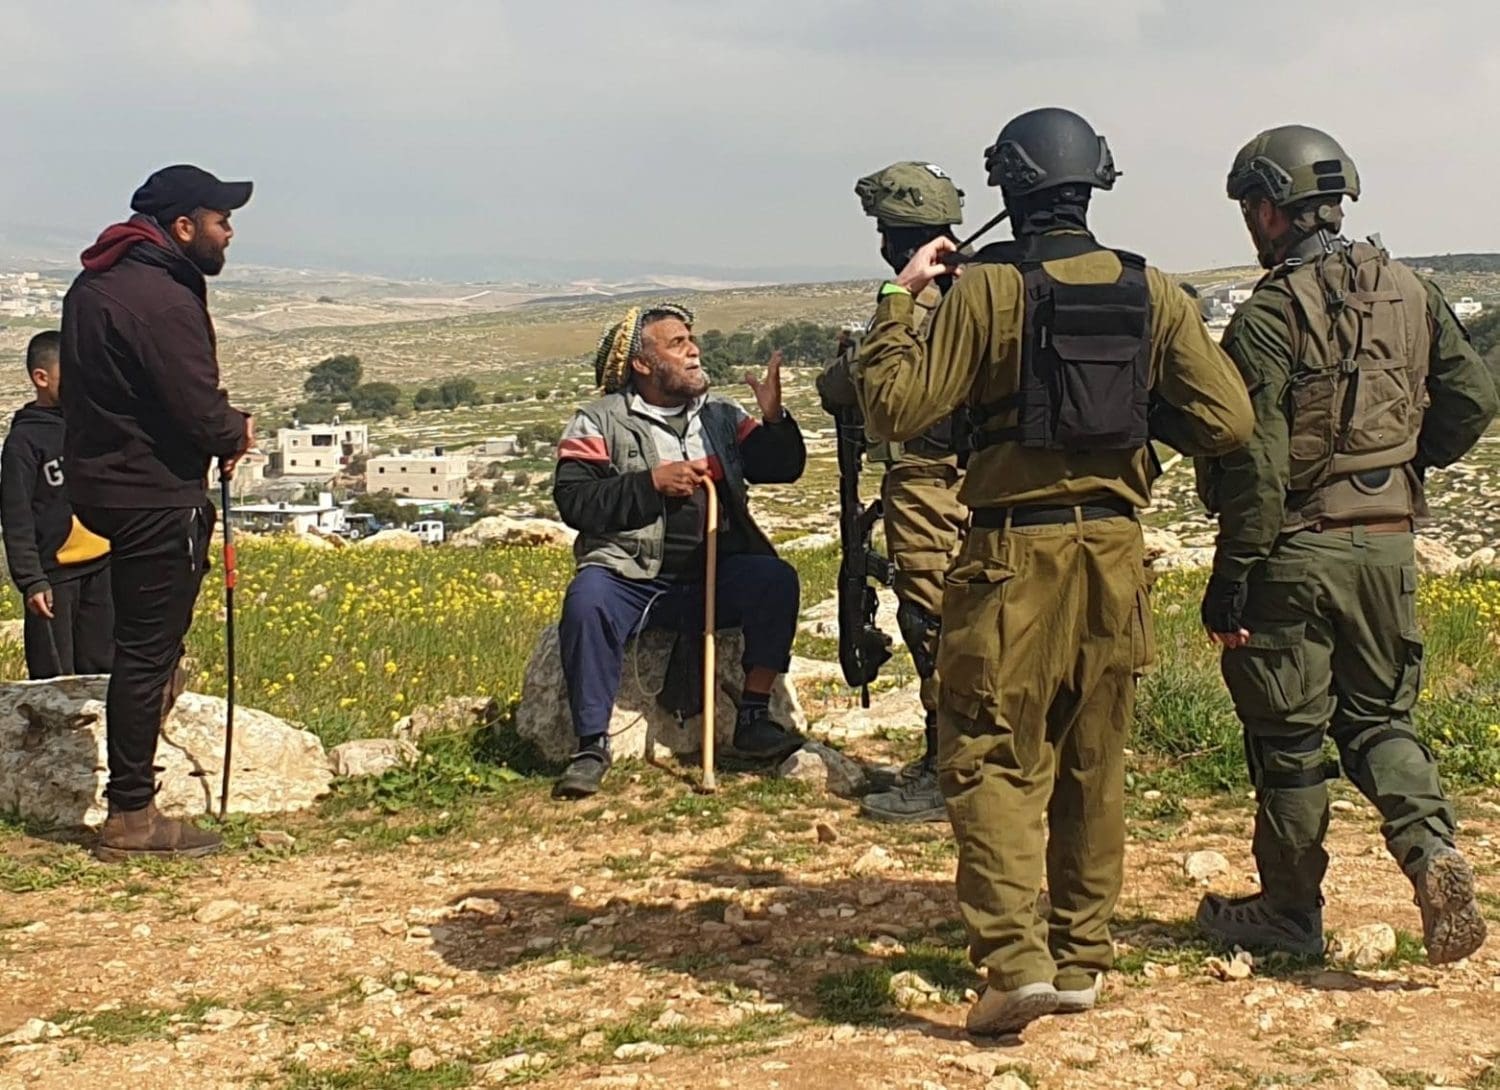 A shepherd being harassed by IDF soldiers in the West Bank